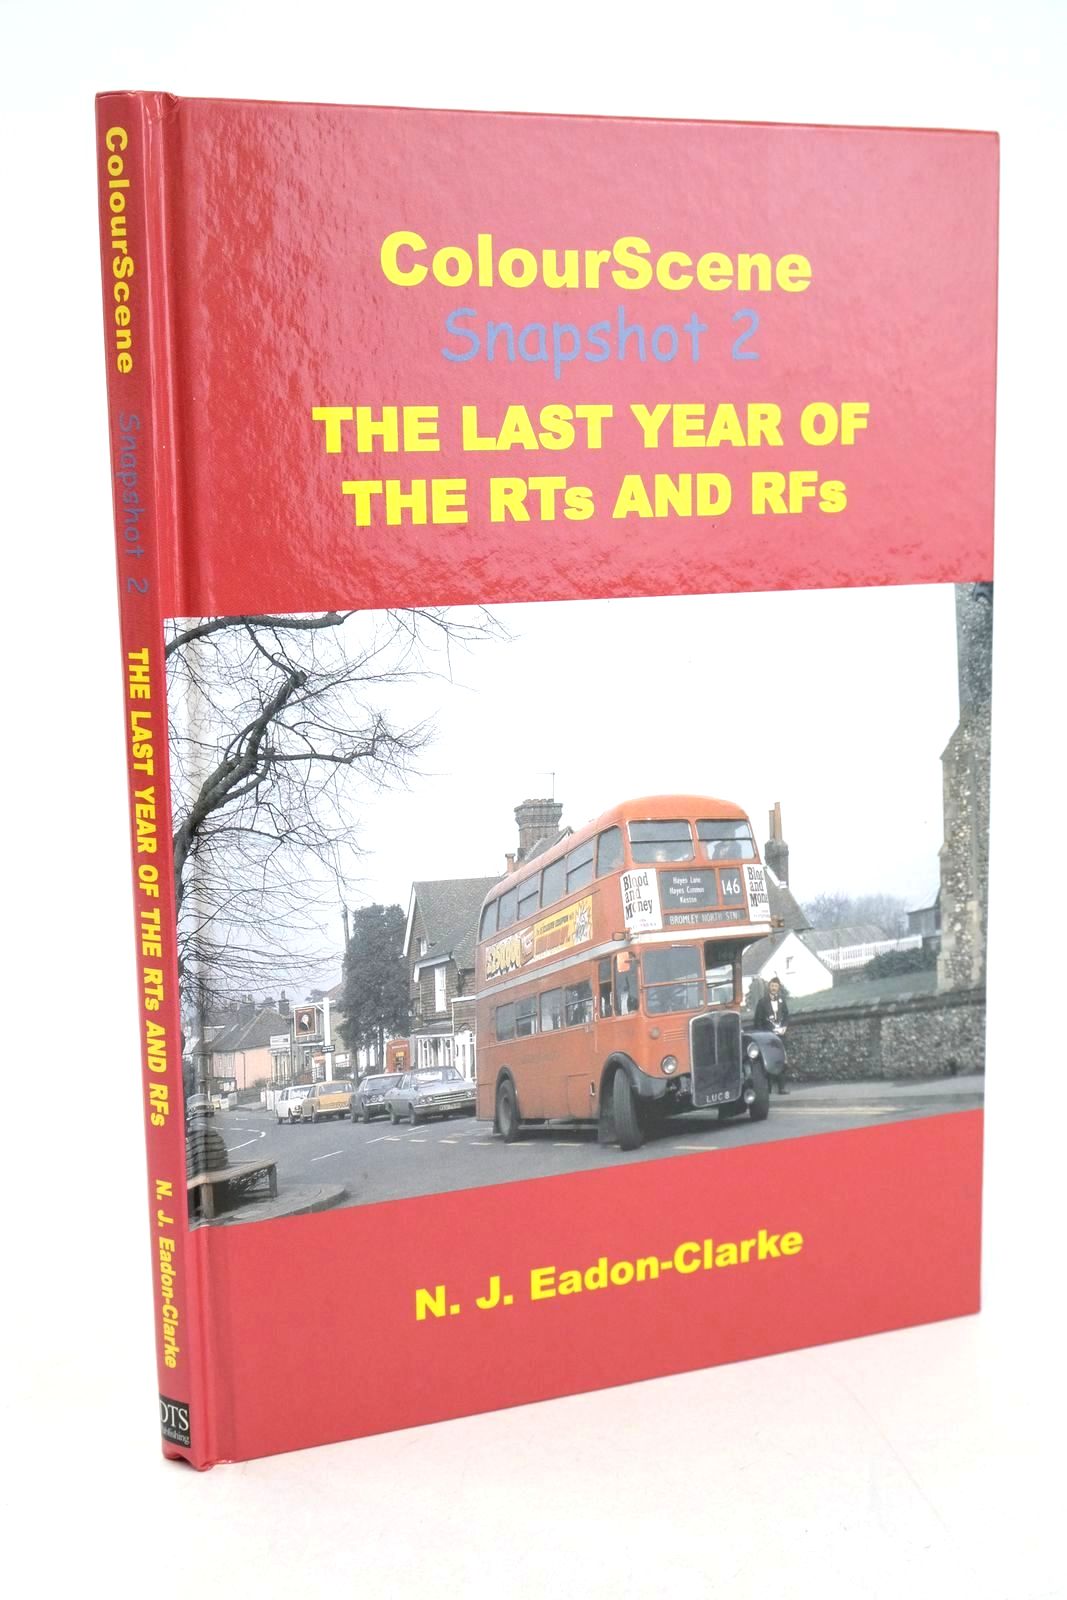 Photo of THE LAST YEAR OF THE RTs and RFs written by Eadon-Clarke, N.J. published by DTS Publishing (STOCK CODE: 1327485)  for sale by Stella & Rose's Books